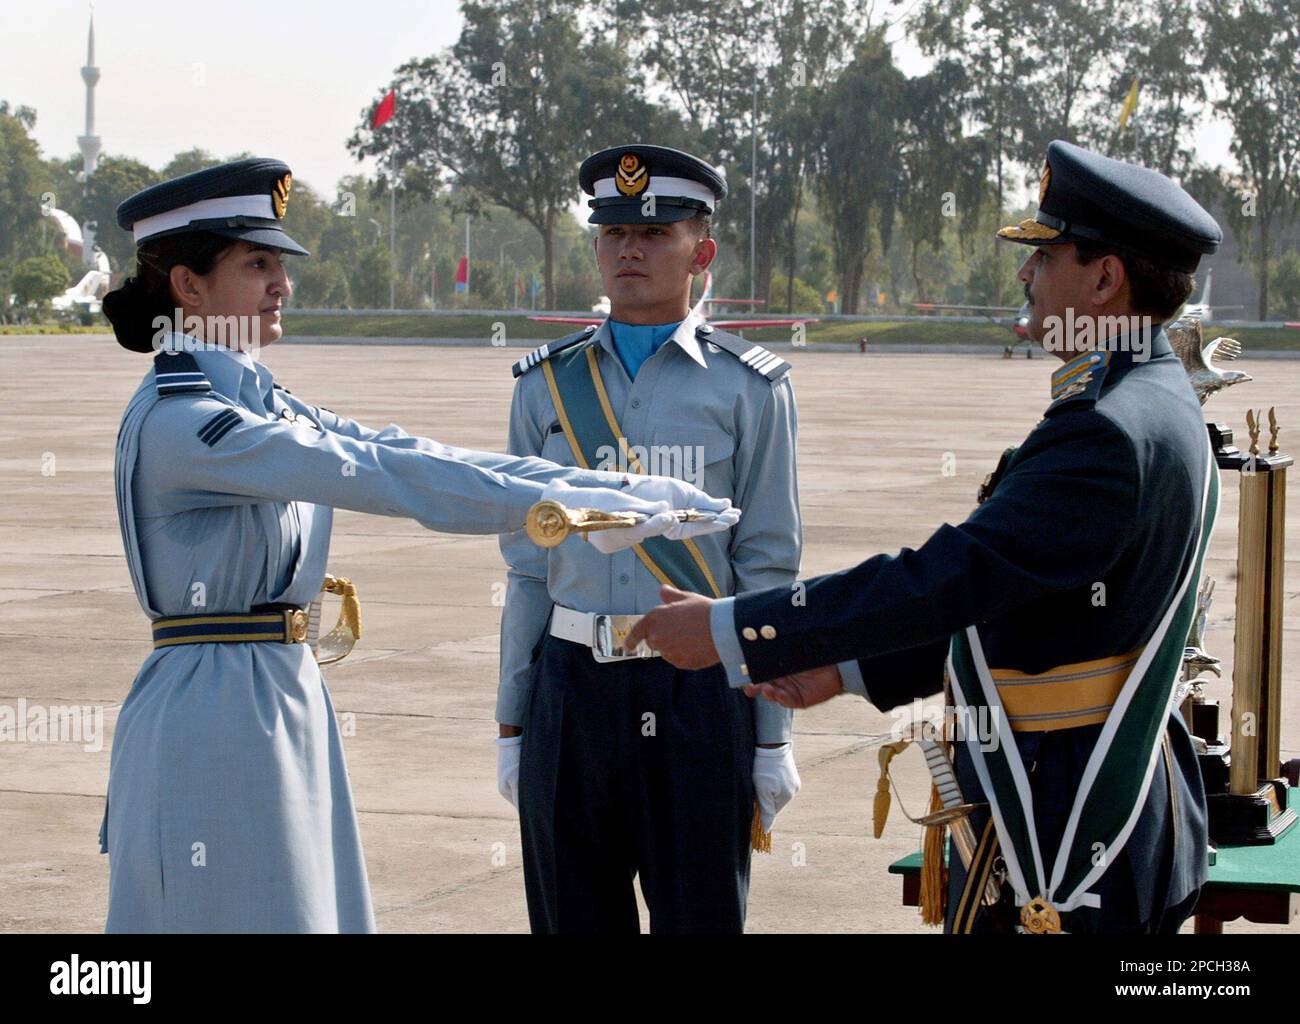 Pakistan Air Force Chief, Air Marshal Tanvir Mahmood Ahmed, right, awards sword of honor for best all round performance to an woman flying officer Sahira Amin, left, during a pass-out parade at